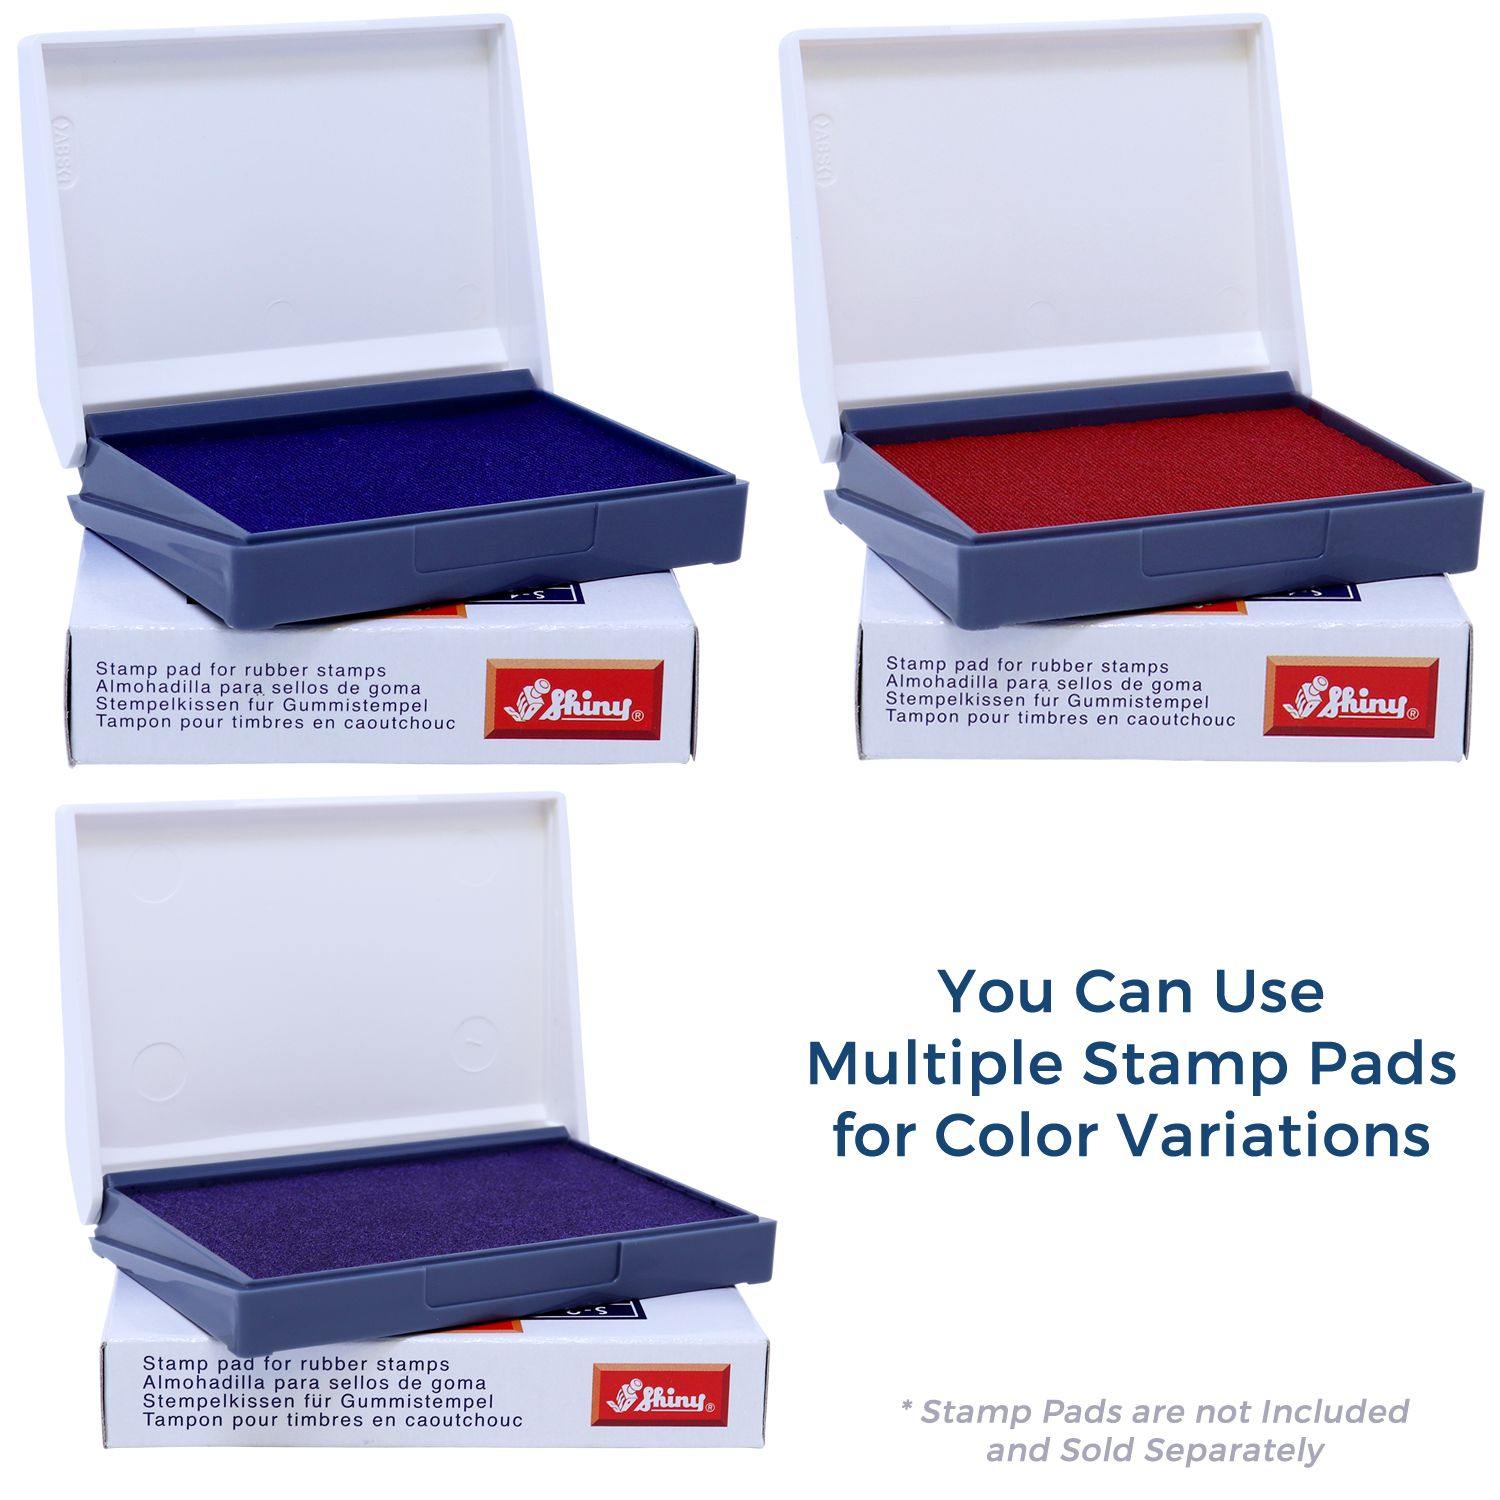 Stamp Pads for Client's Copy Rubber Stamp Available